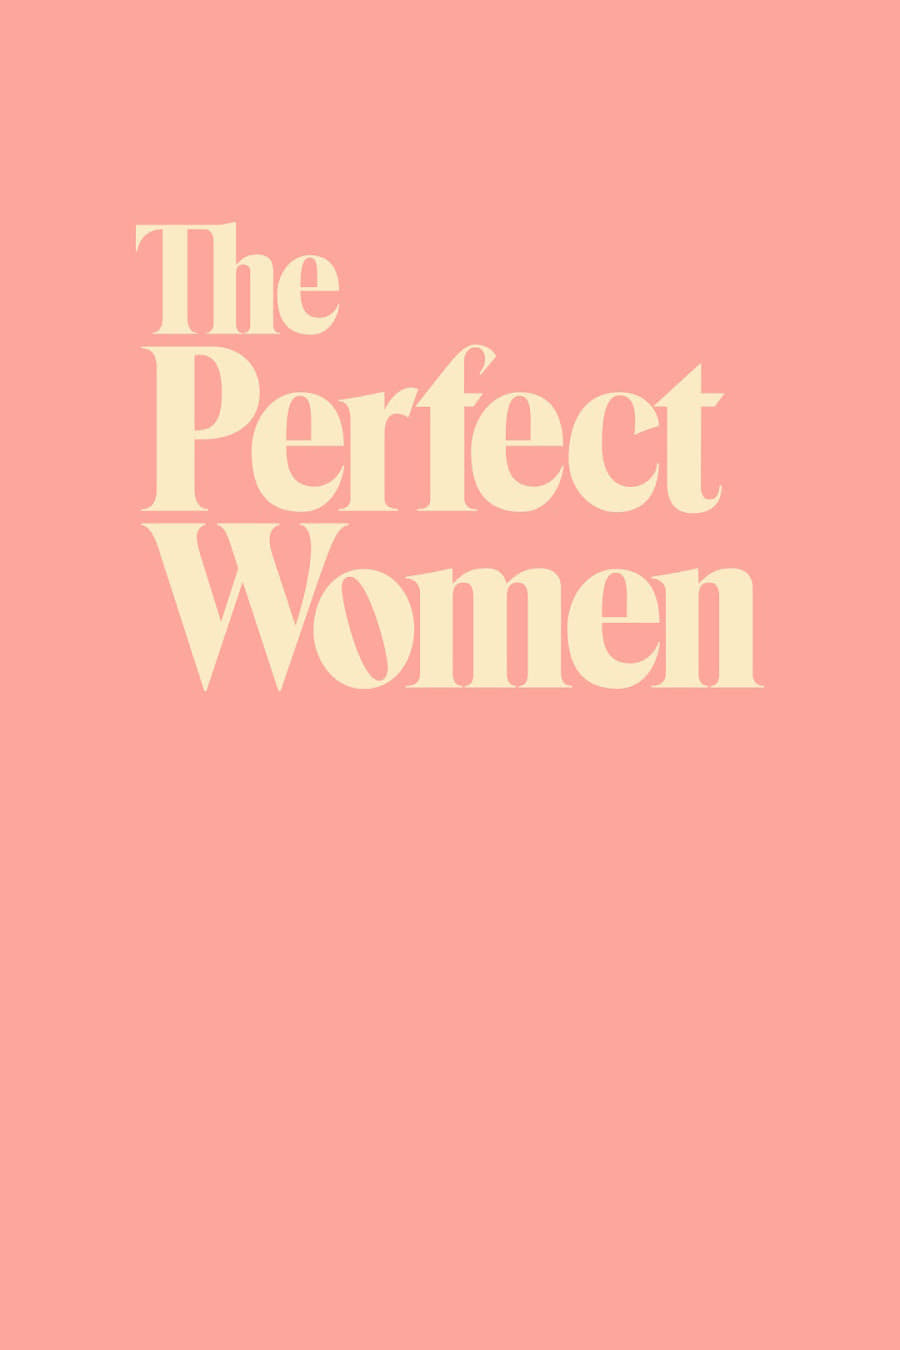 The Perfect Women